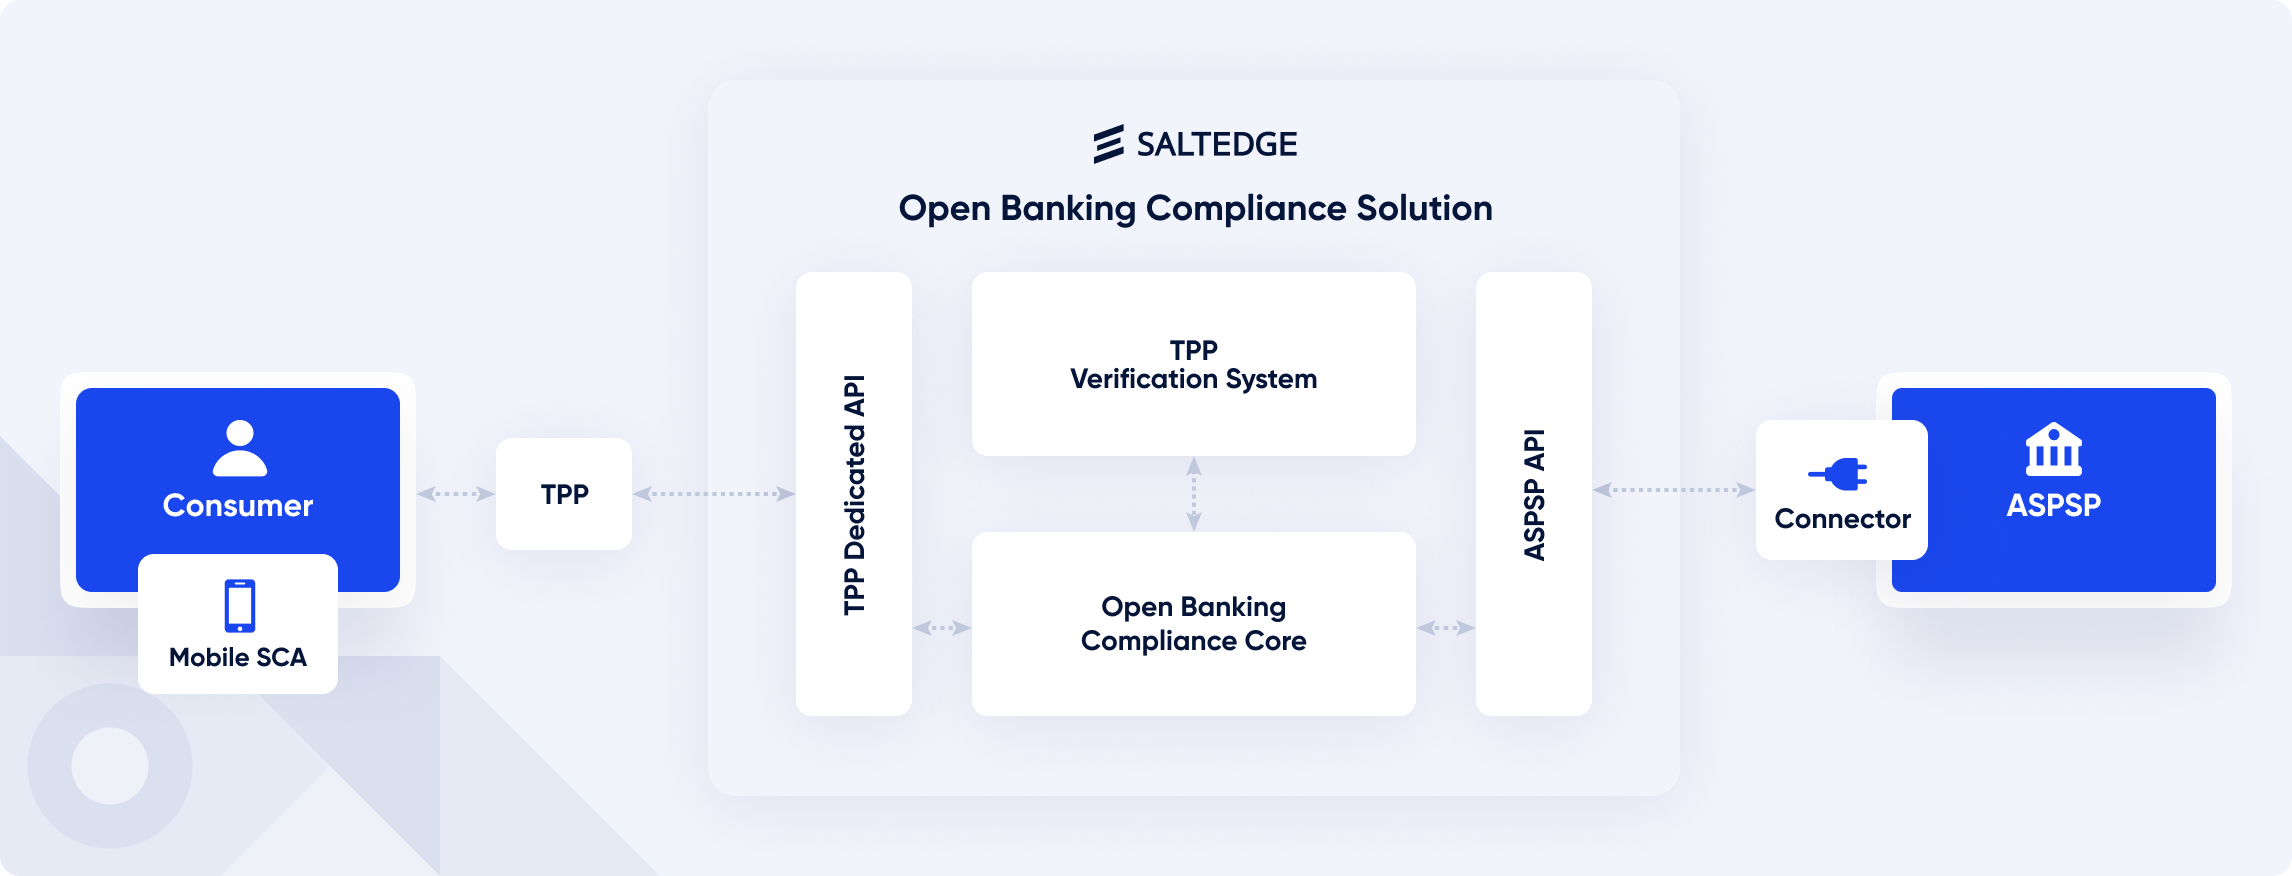 Become fully open banking compliant in just 1 month